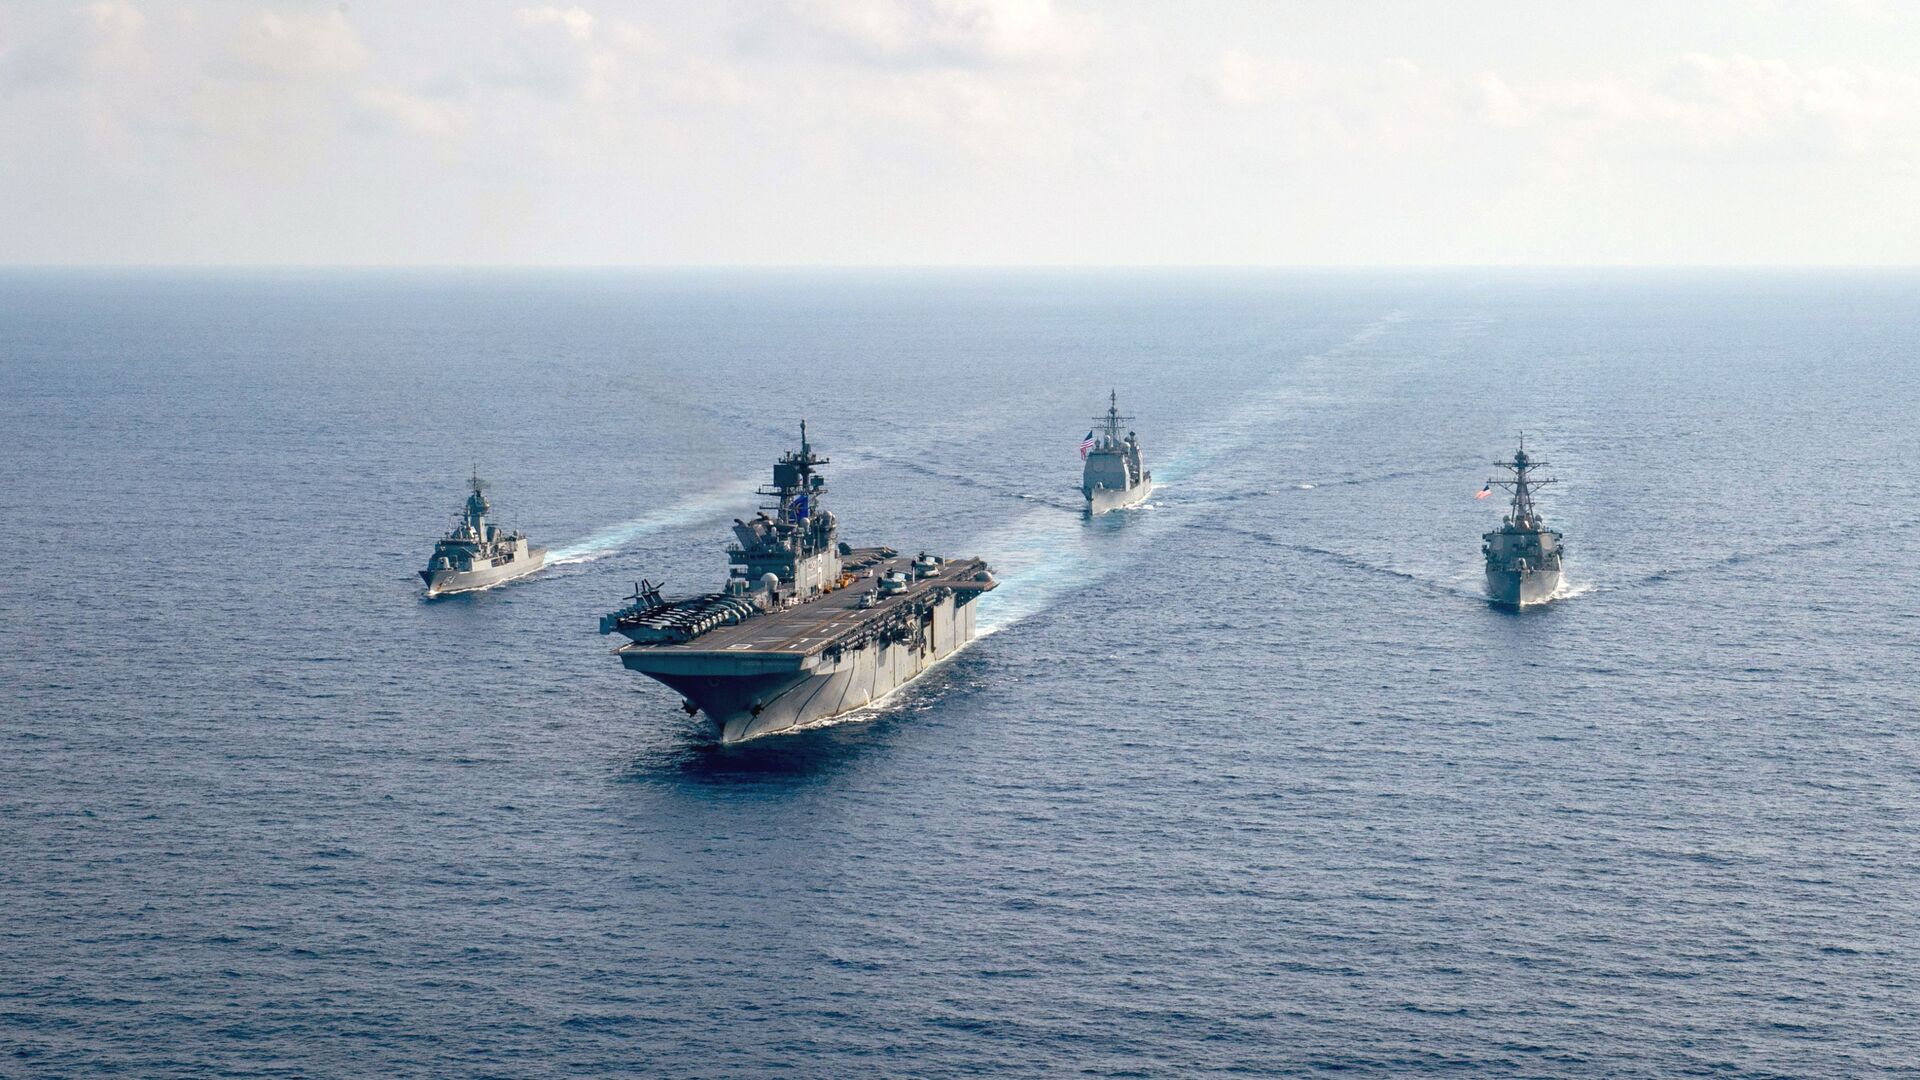 The Royal Australian Navy guided-missile frigate HMAS Parramatta (FFH 154), left, is underway with the U.S. Navy amphibious assault ship USS America (LHA 6), the Ticonderoga-class guided-missile cruiser USS Bunker Hill (CG 52) and the Arleigh-Burke-class guided-missile destroyer USS Barry (DDG 52). - Sputnik International, 1920, 13.09.2022